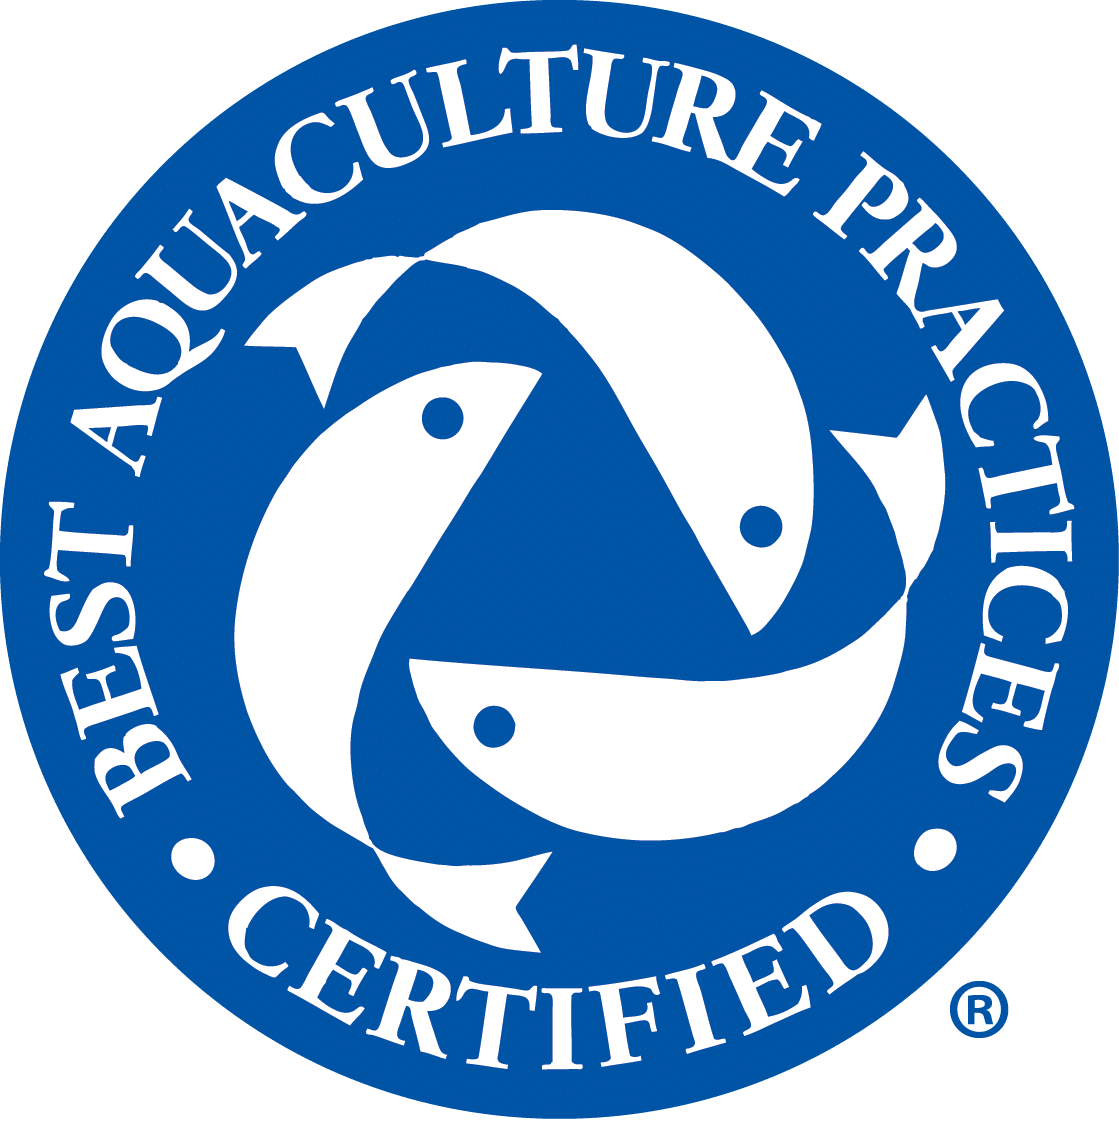 BAP-3-STAR certified seafood from aquaculture (Best Aquaculture Practices) - BAP-3-STAR certified seafood from aquaculture (Best Aquaculture Practices)